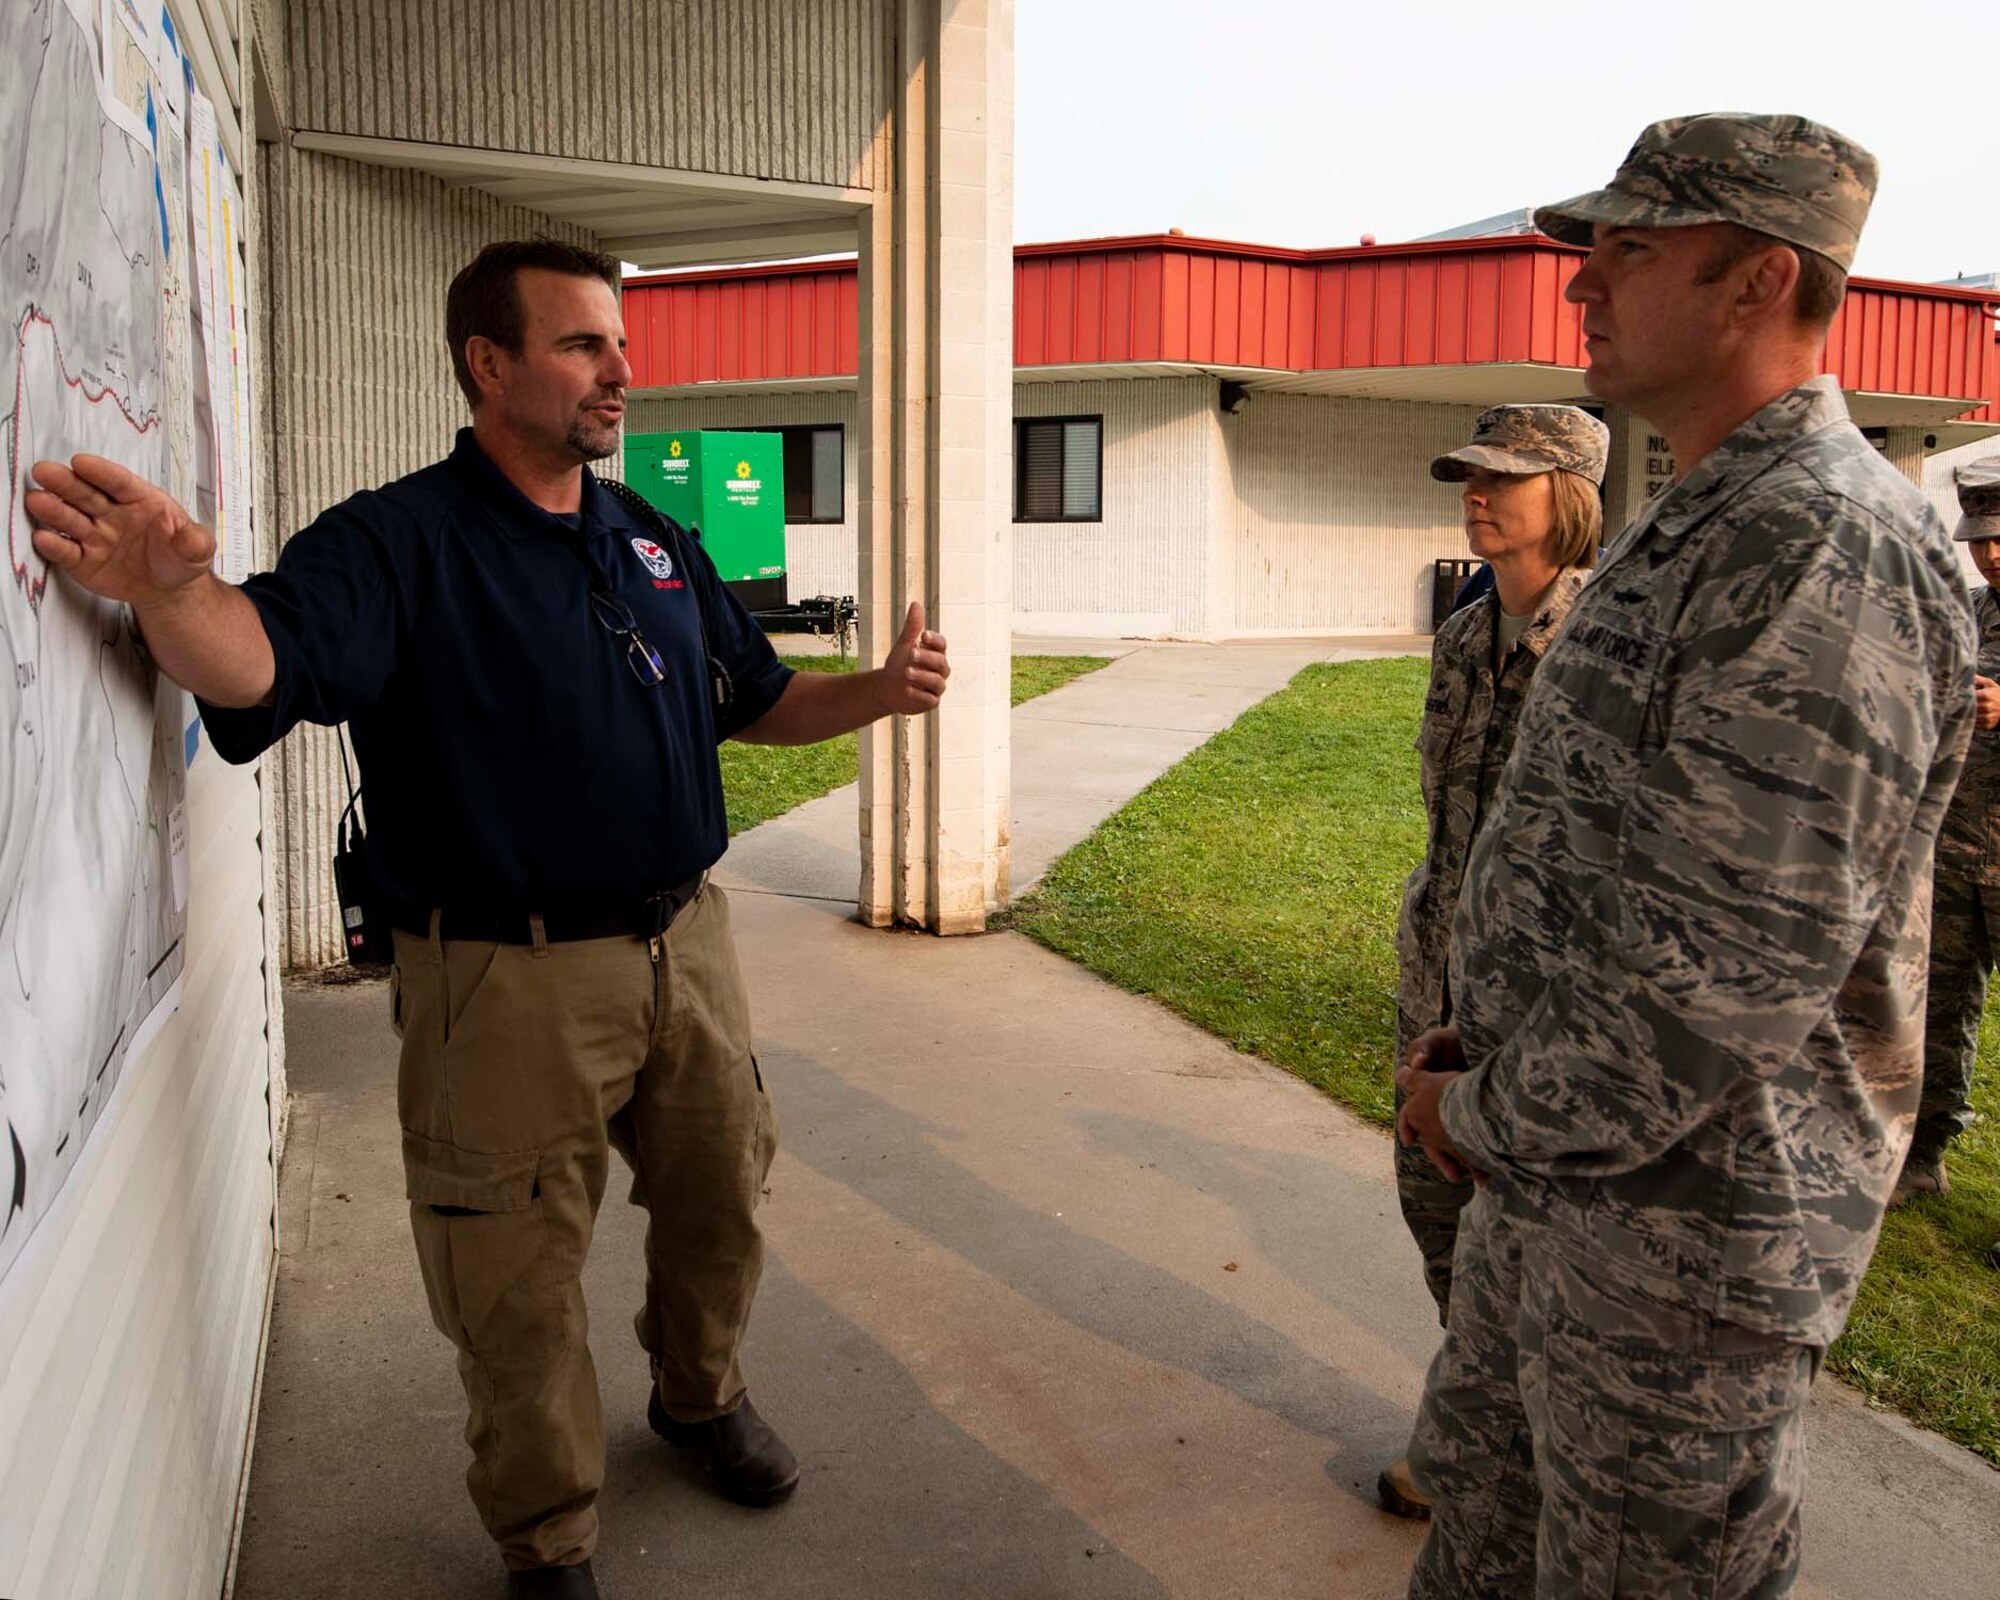 Andrew Stenbeck, the incident commander at the Sheep Creek fire camp, briefs Col. Johan Deutscher, commander of the 141st Air Refueling Wing, on the incident action plan for the Sheep Creek fire in Northport, Wash. August 8, 2018. Nearly 60 Guardsmen from the 141st ARW were mobilized to help support firefighting efforts throughout the region. (U.S. Air National Guard photo by Staff Sgt. Rose M. Lust)